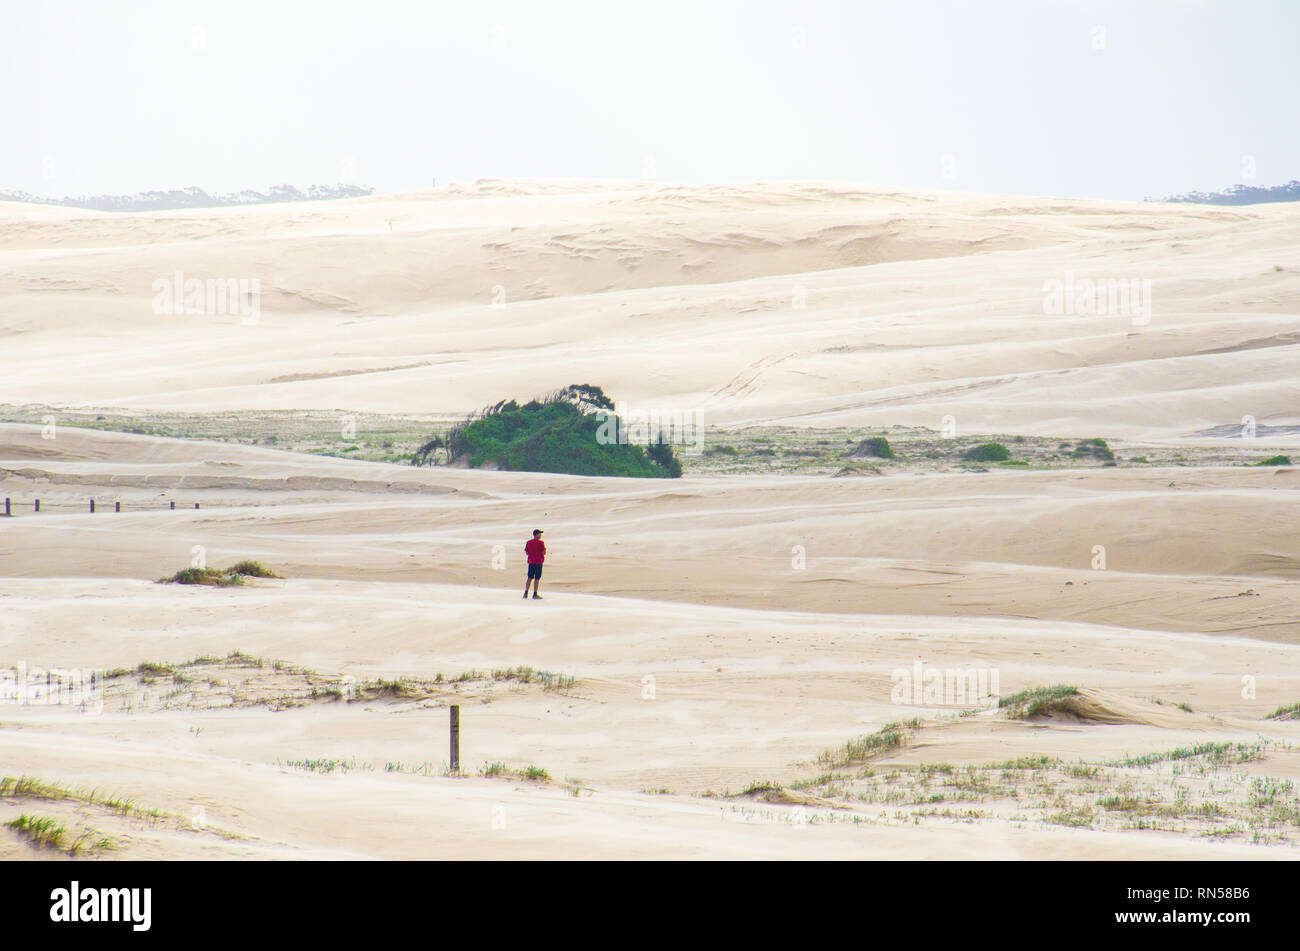 Lone man stands in dry arid sand dunes. Man explores Stockton Sand dunes, Port Stephens, the largest moving sand dunes in Australia. Stock Photo